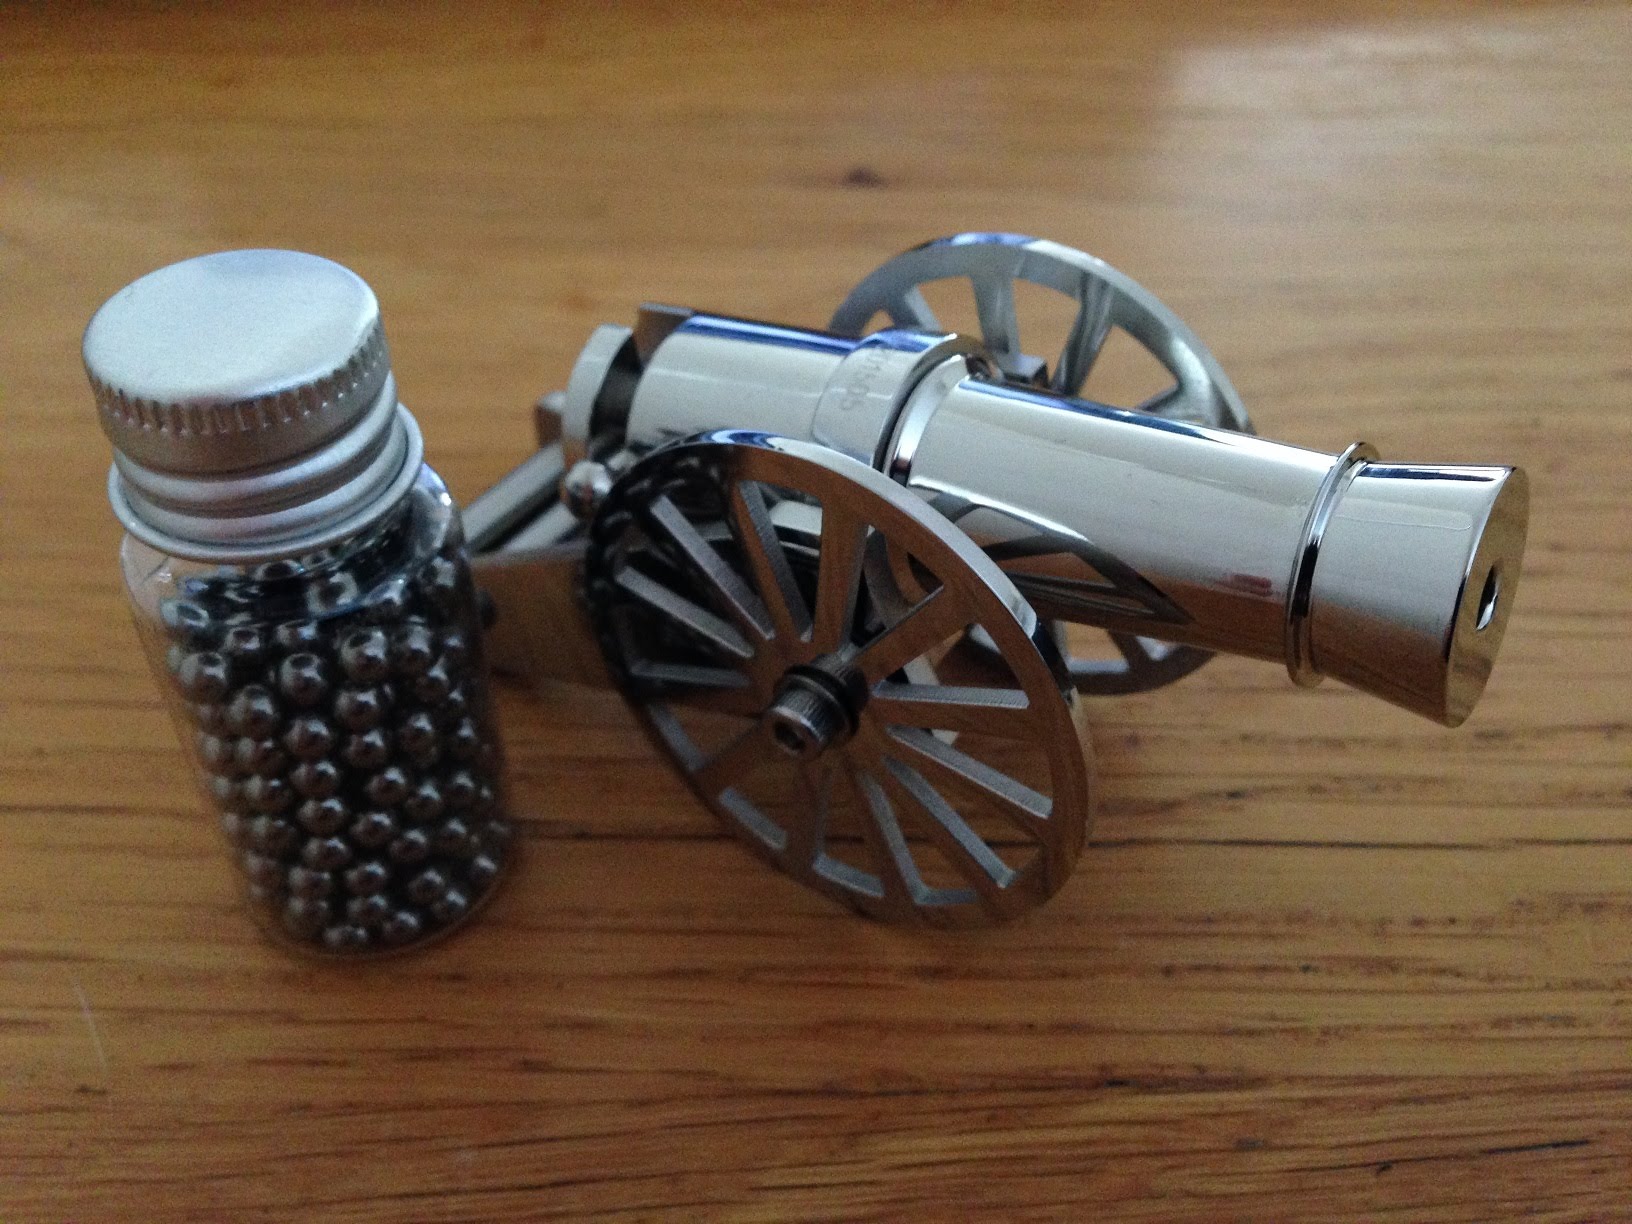 Unboxing the real 4mm Miniature Cannon 